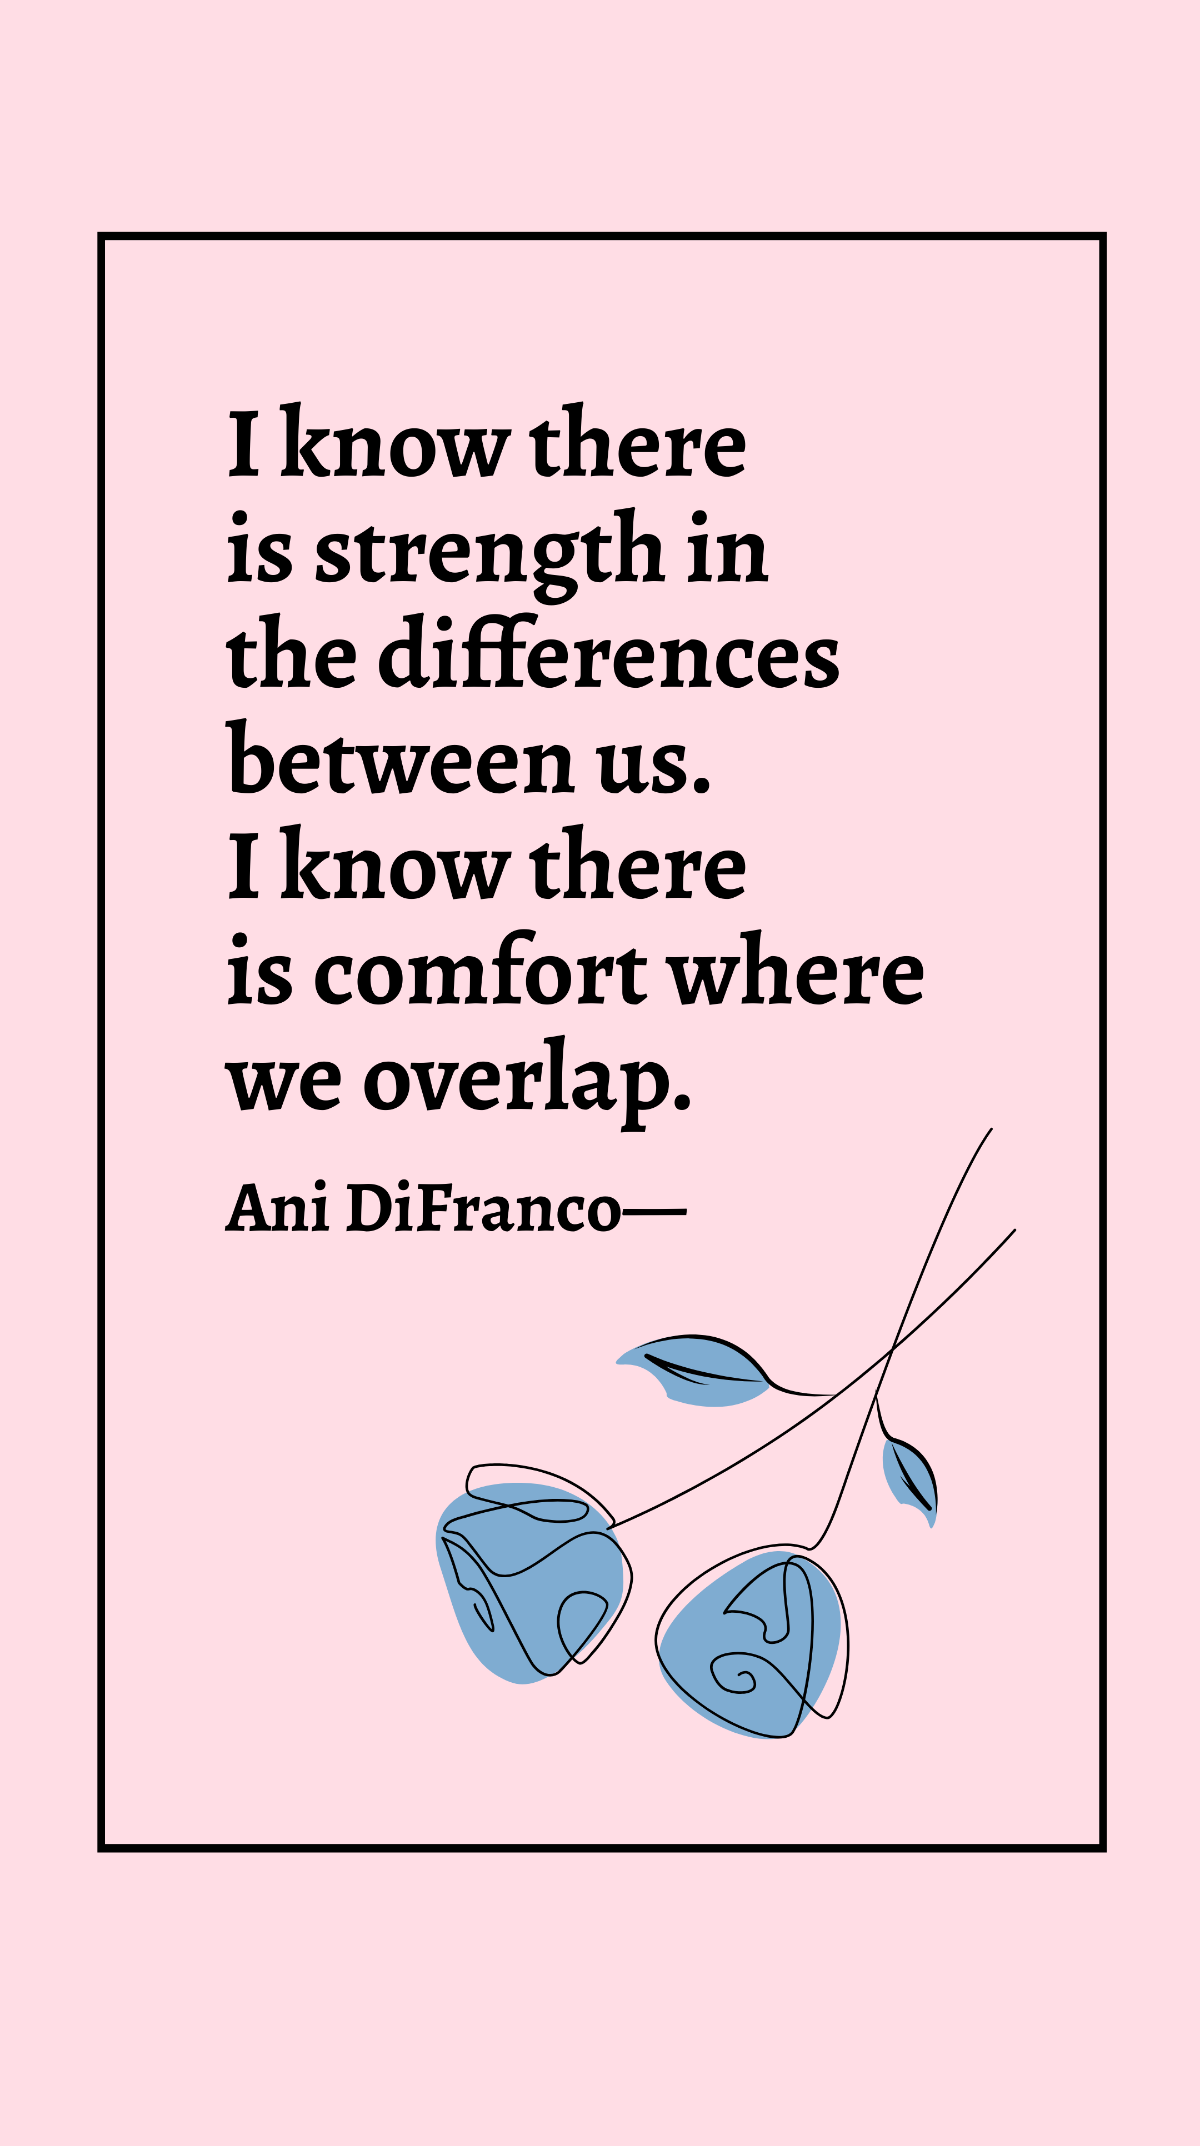 Ani DiFranco - I know there is strength in the differences between us. I know there is comfort where we overlap. Template